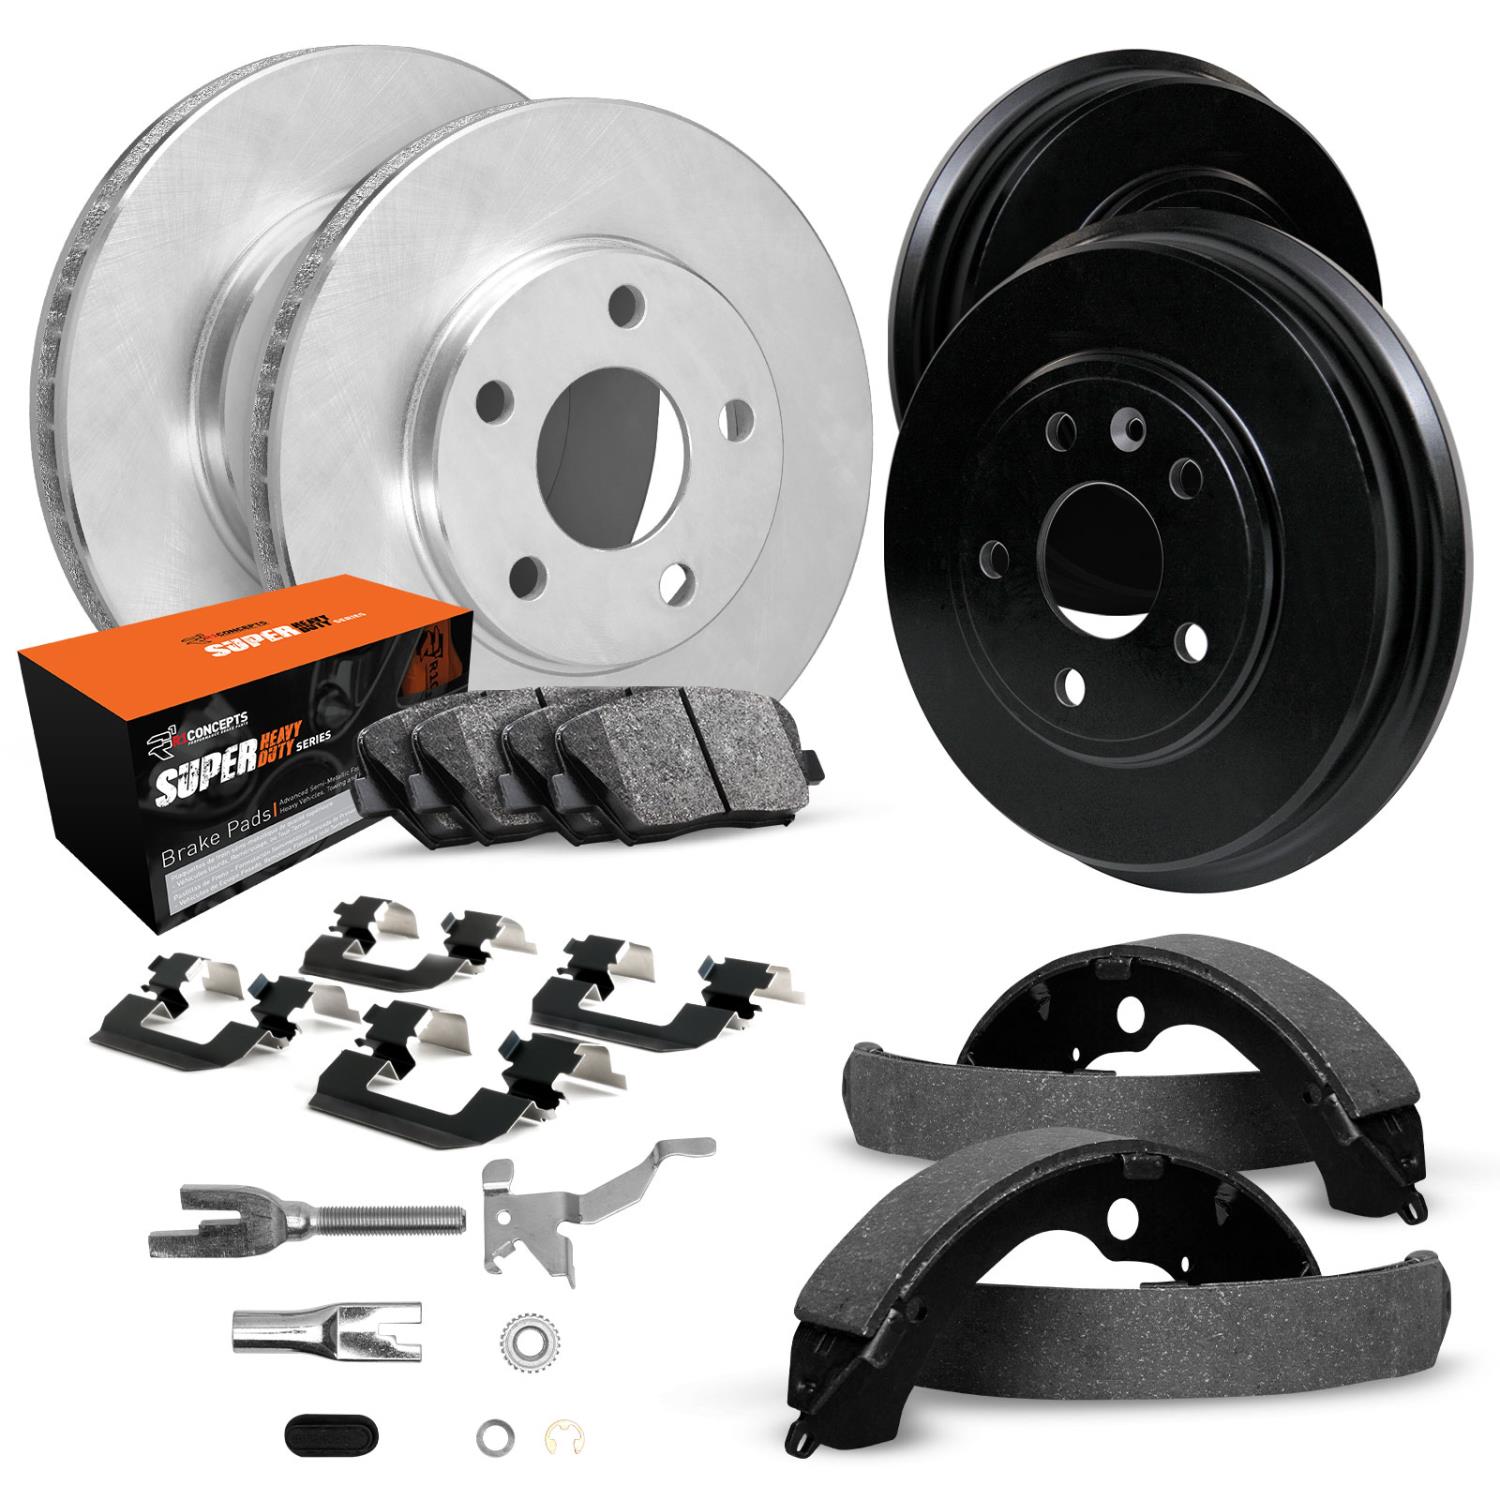 E-Line Blank Brake Rotor & Drum Set w/Super-Duty Pads, Shoes, Hardware, & Adjusters, 1971-1976 GM, Position: Front & Rear